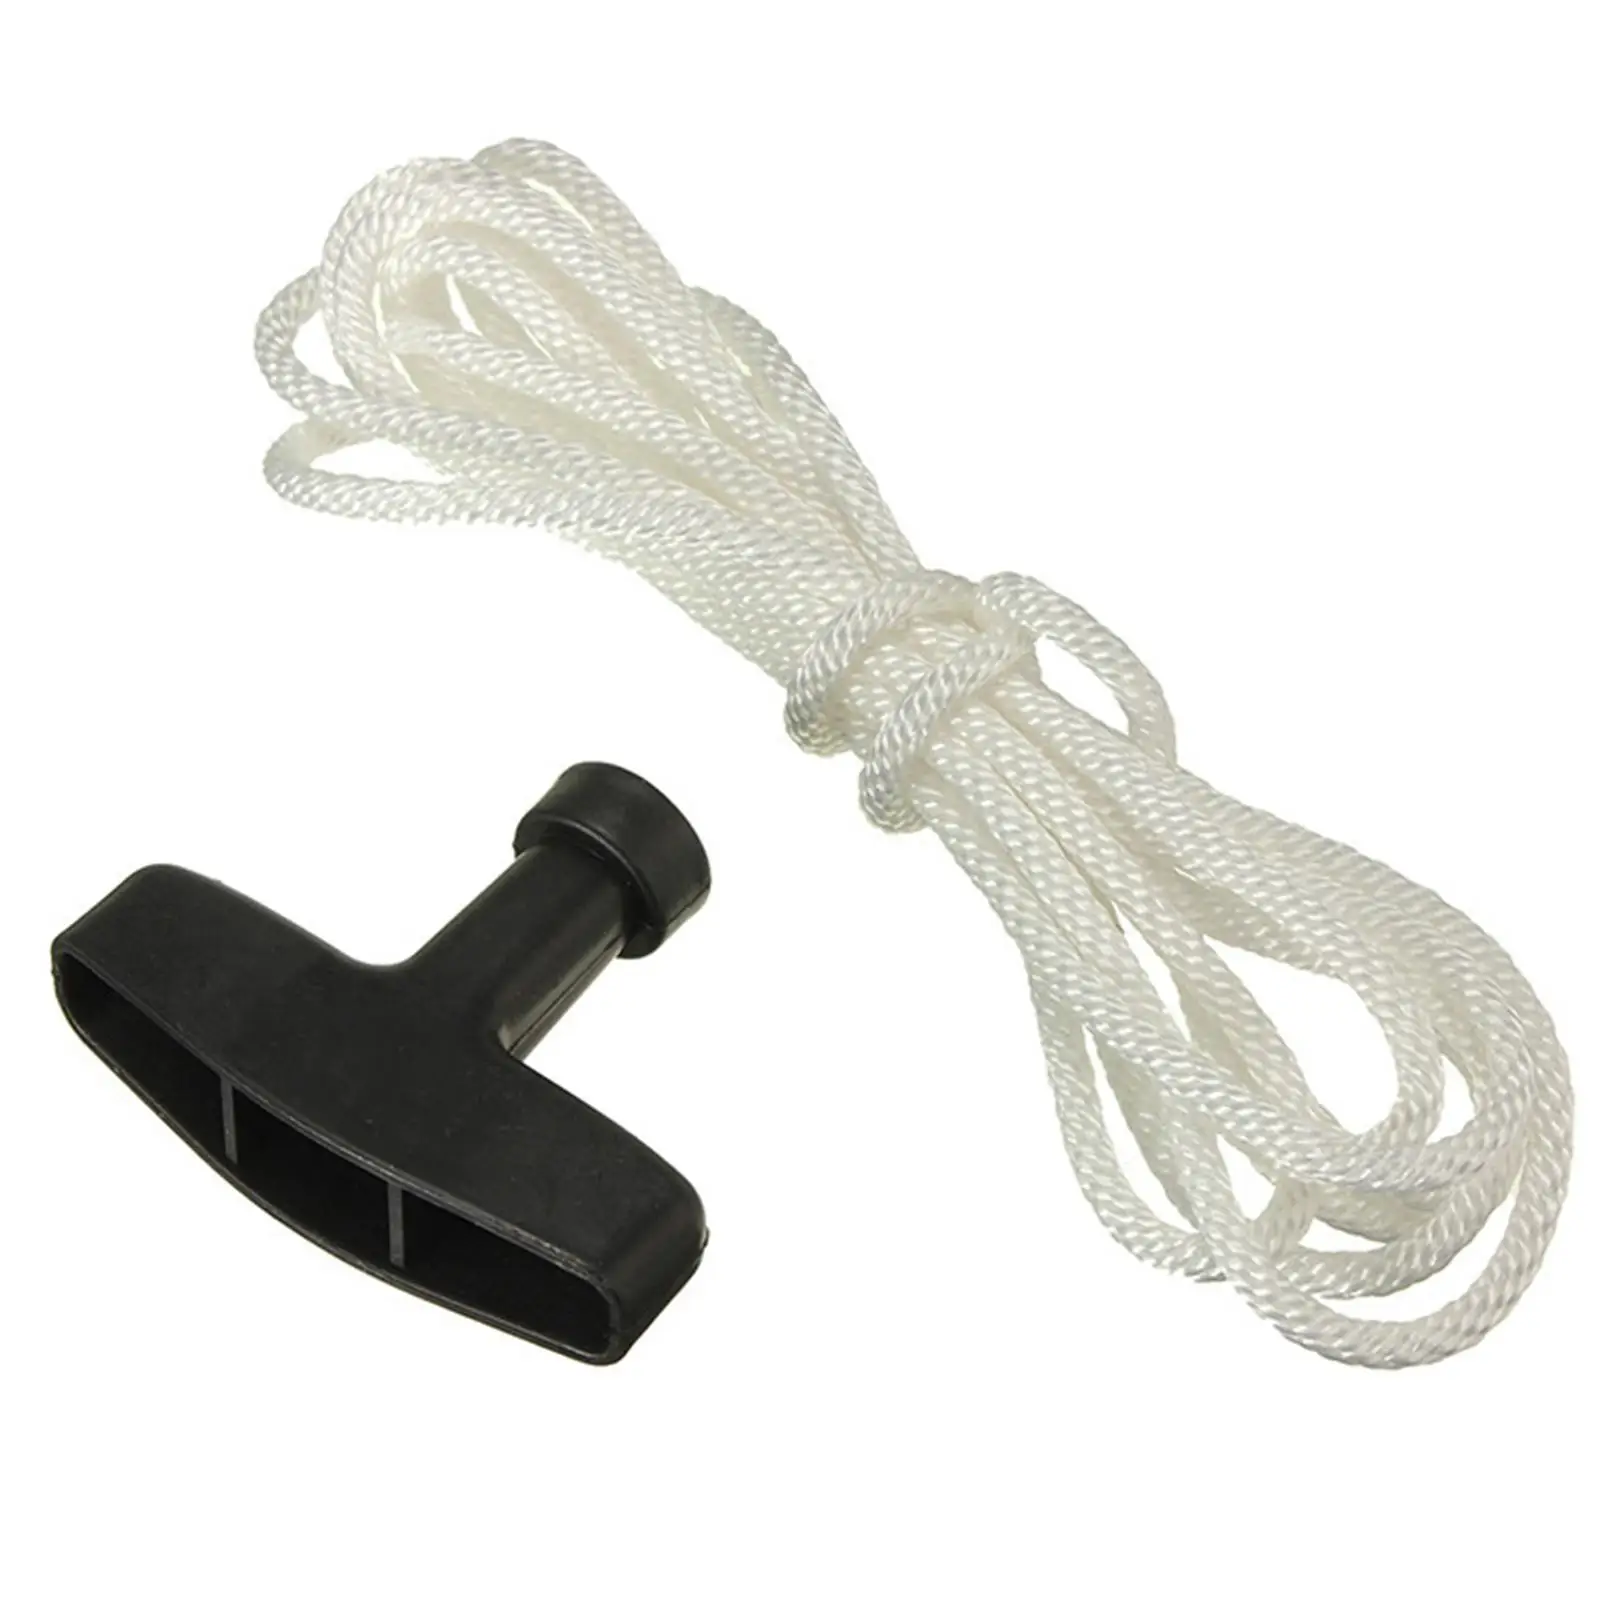 Starter Handle with Rope Mower Pull Cord Strong for Generator Electric Mower Accessories